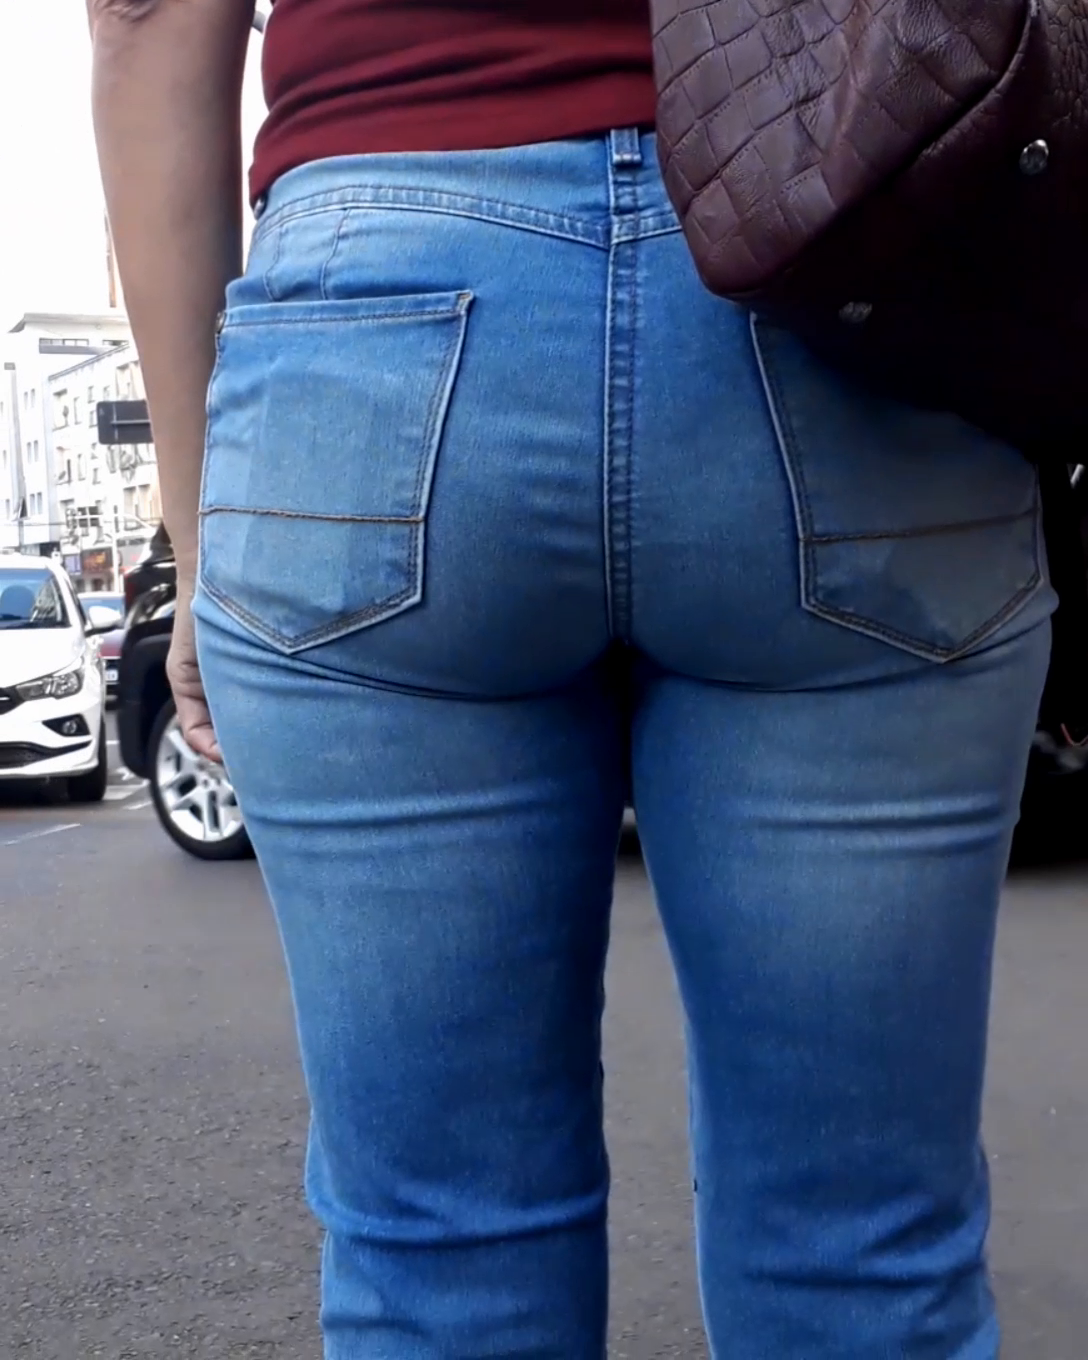 Candid Milf Ass in Tight Jeans - Porn